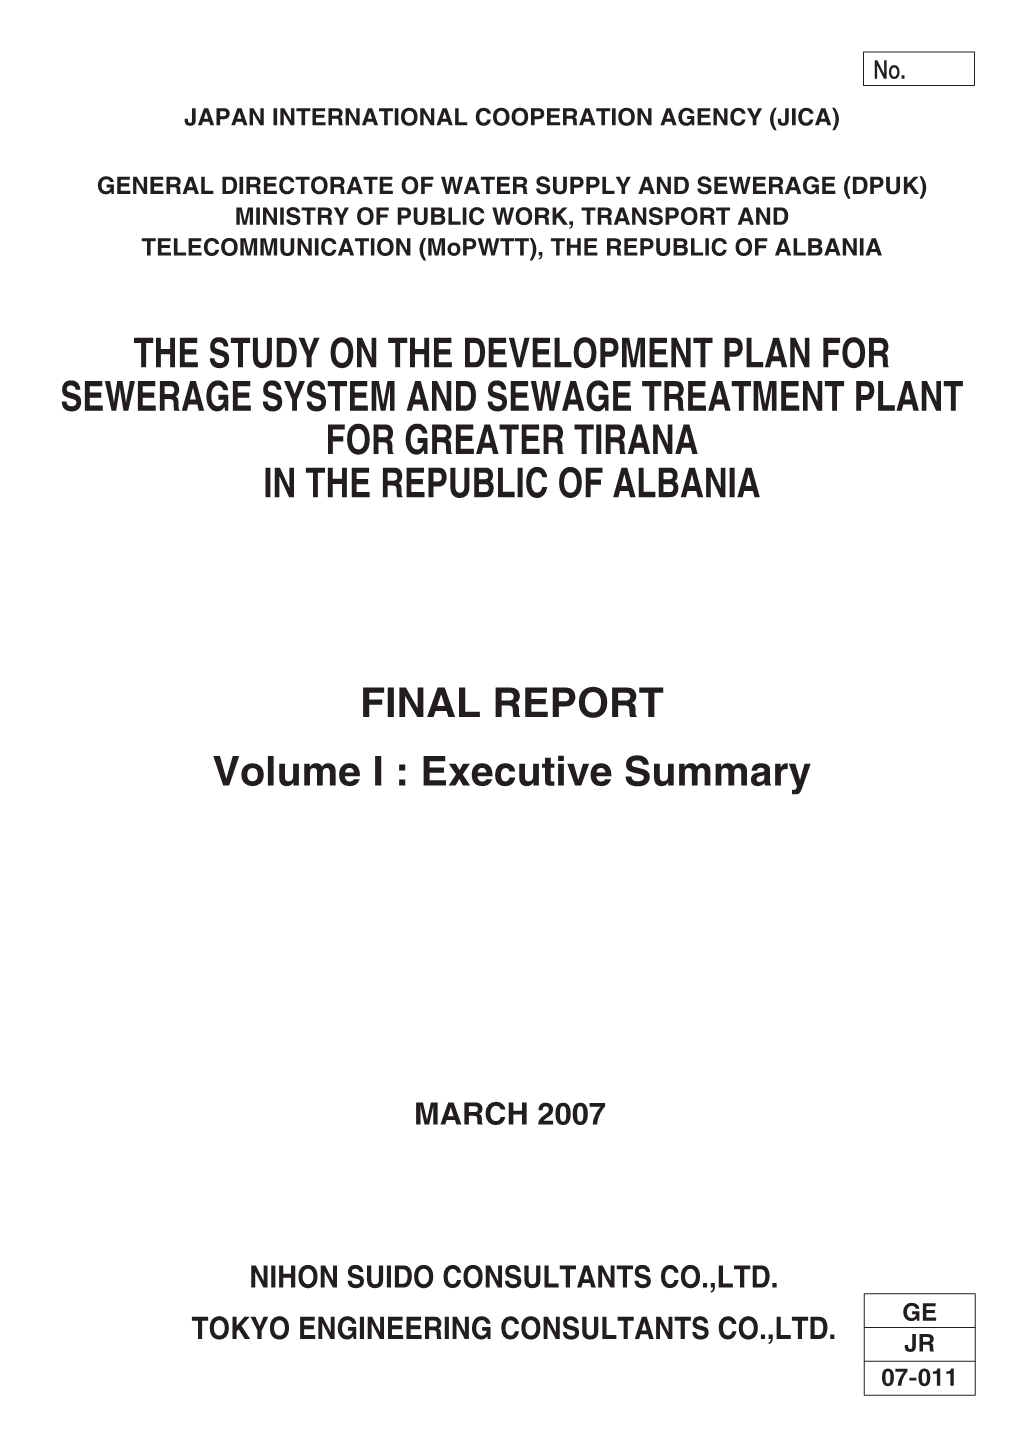 The Study on the Development Plan for Sewerage System and Sewage